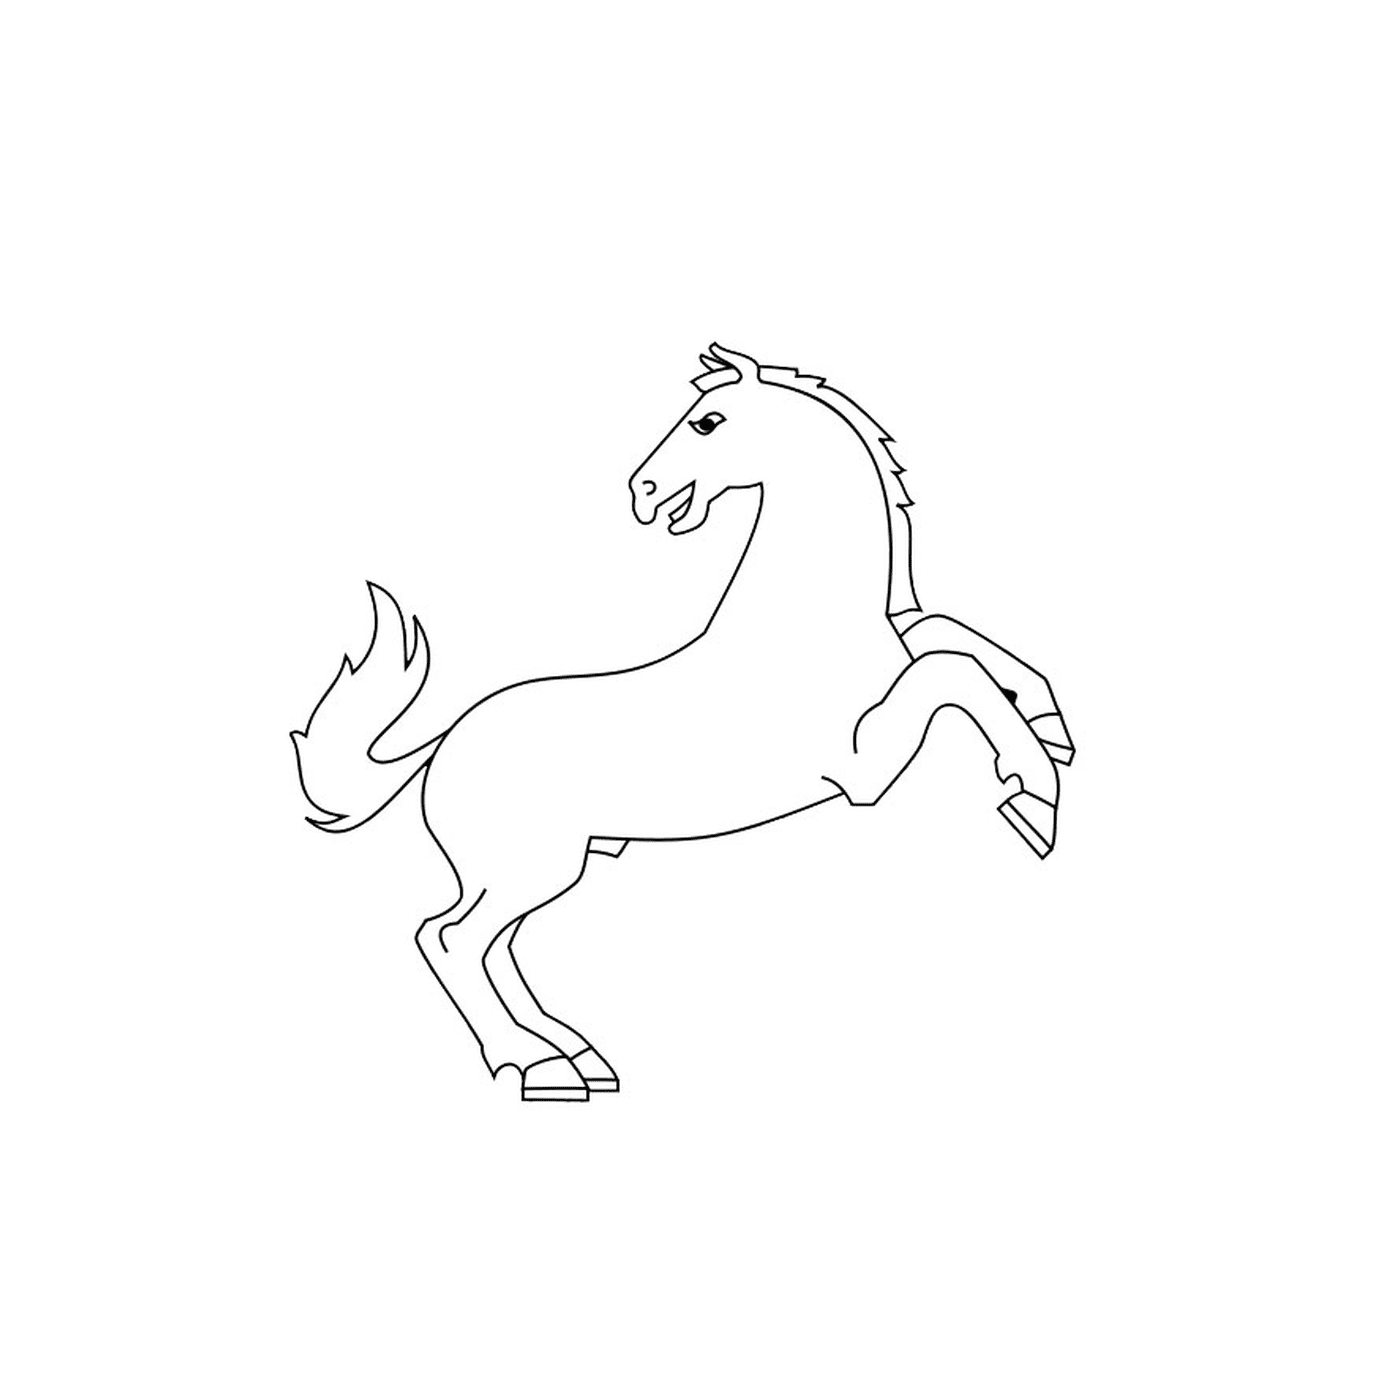  A galloping horse in a field 